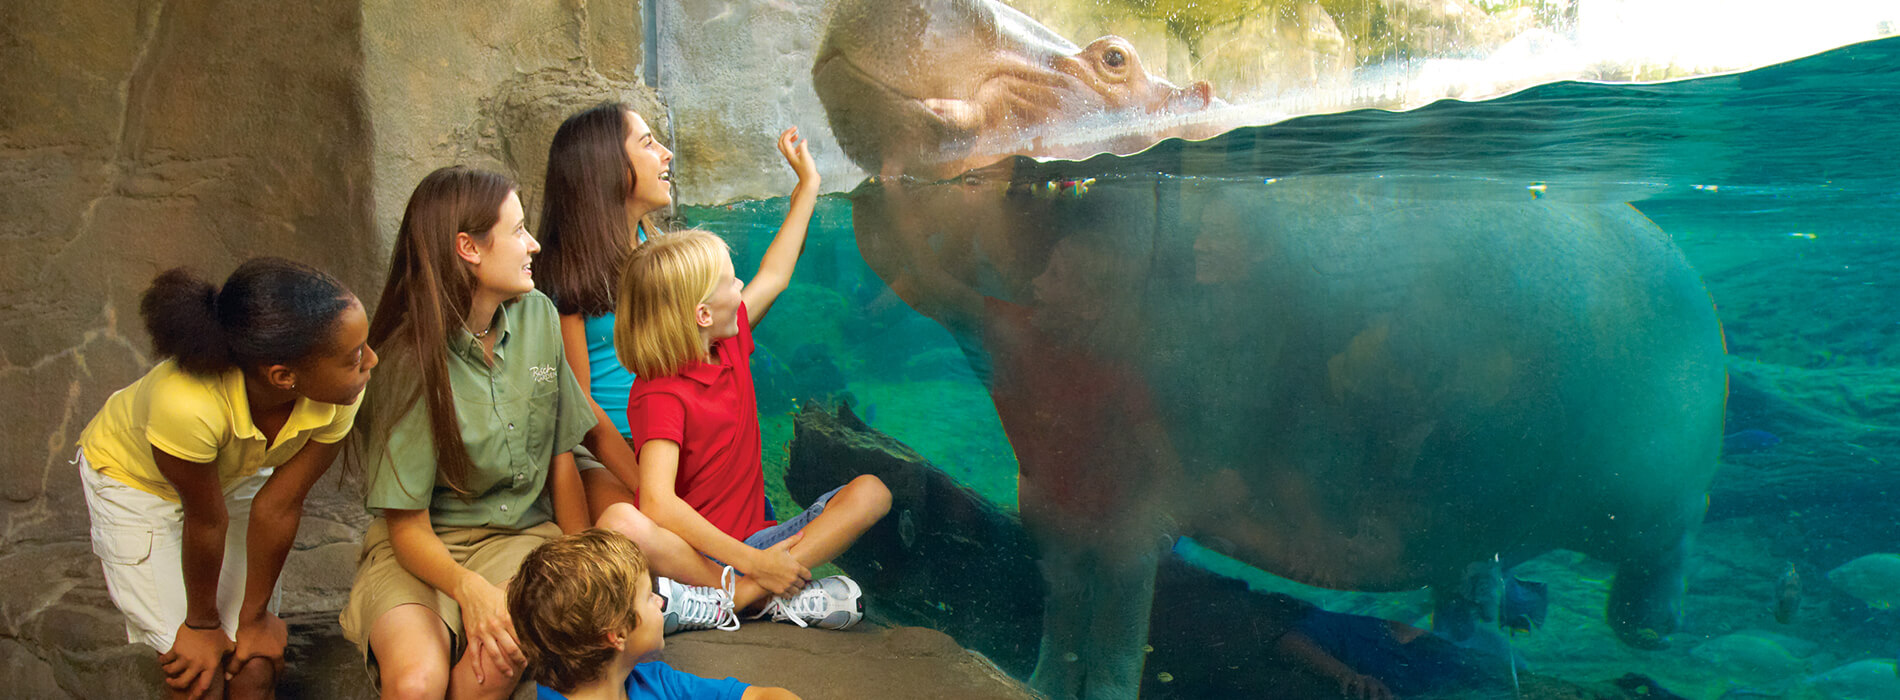 Teachers and Educators Camps at Busch Gardens Tampa Bay